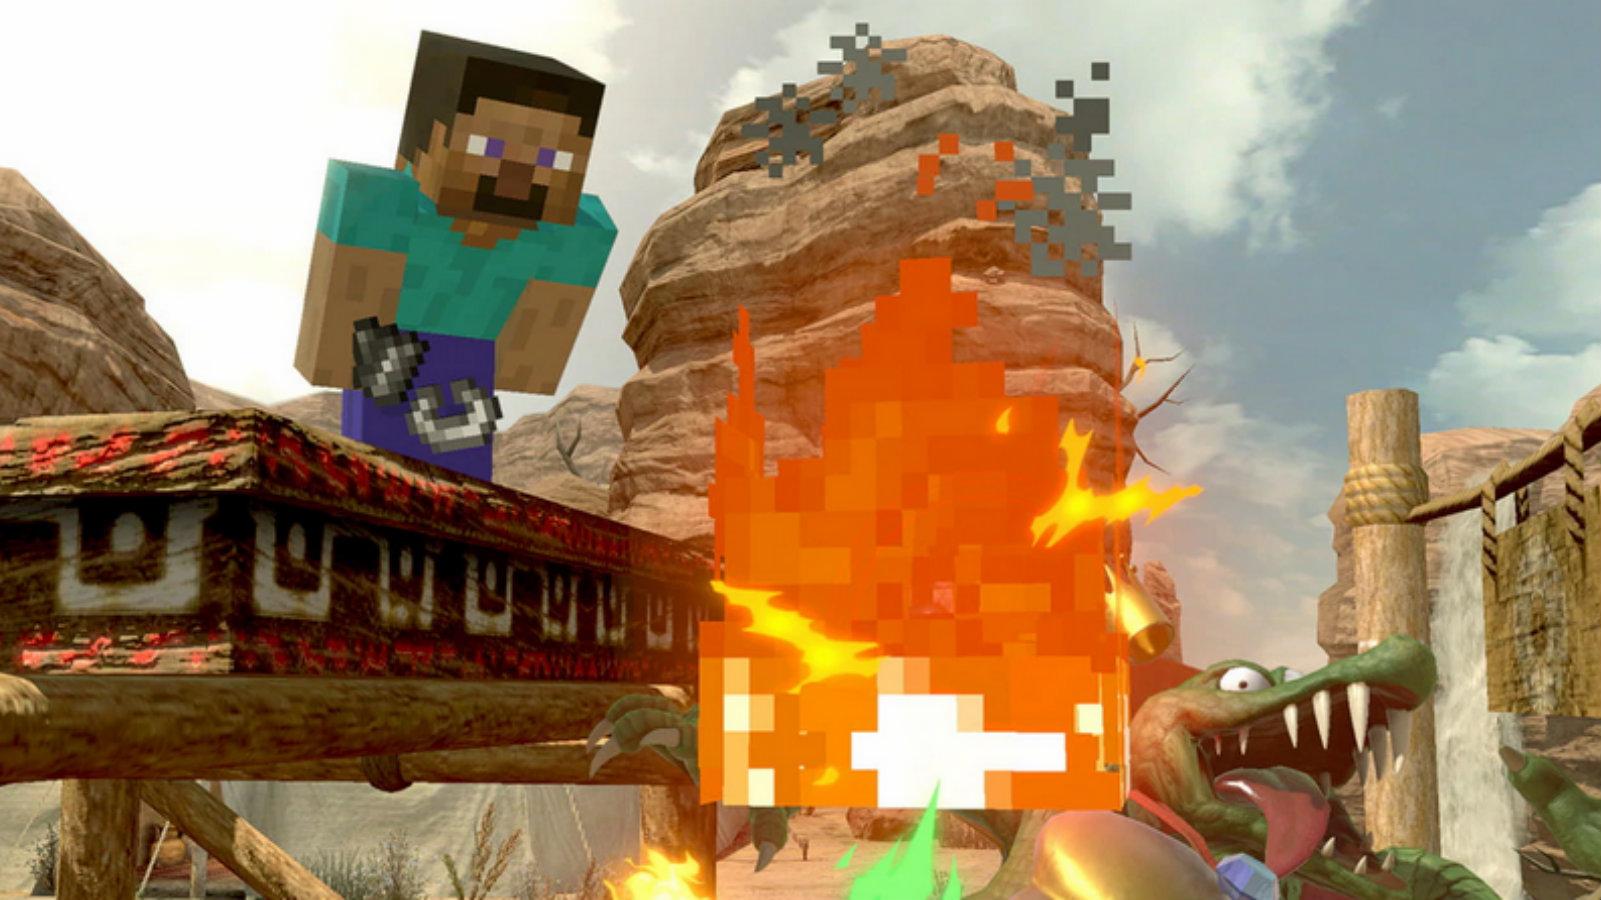 Steve from Minecraft is a major threat